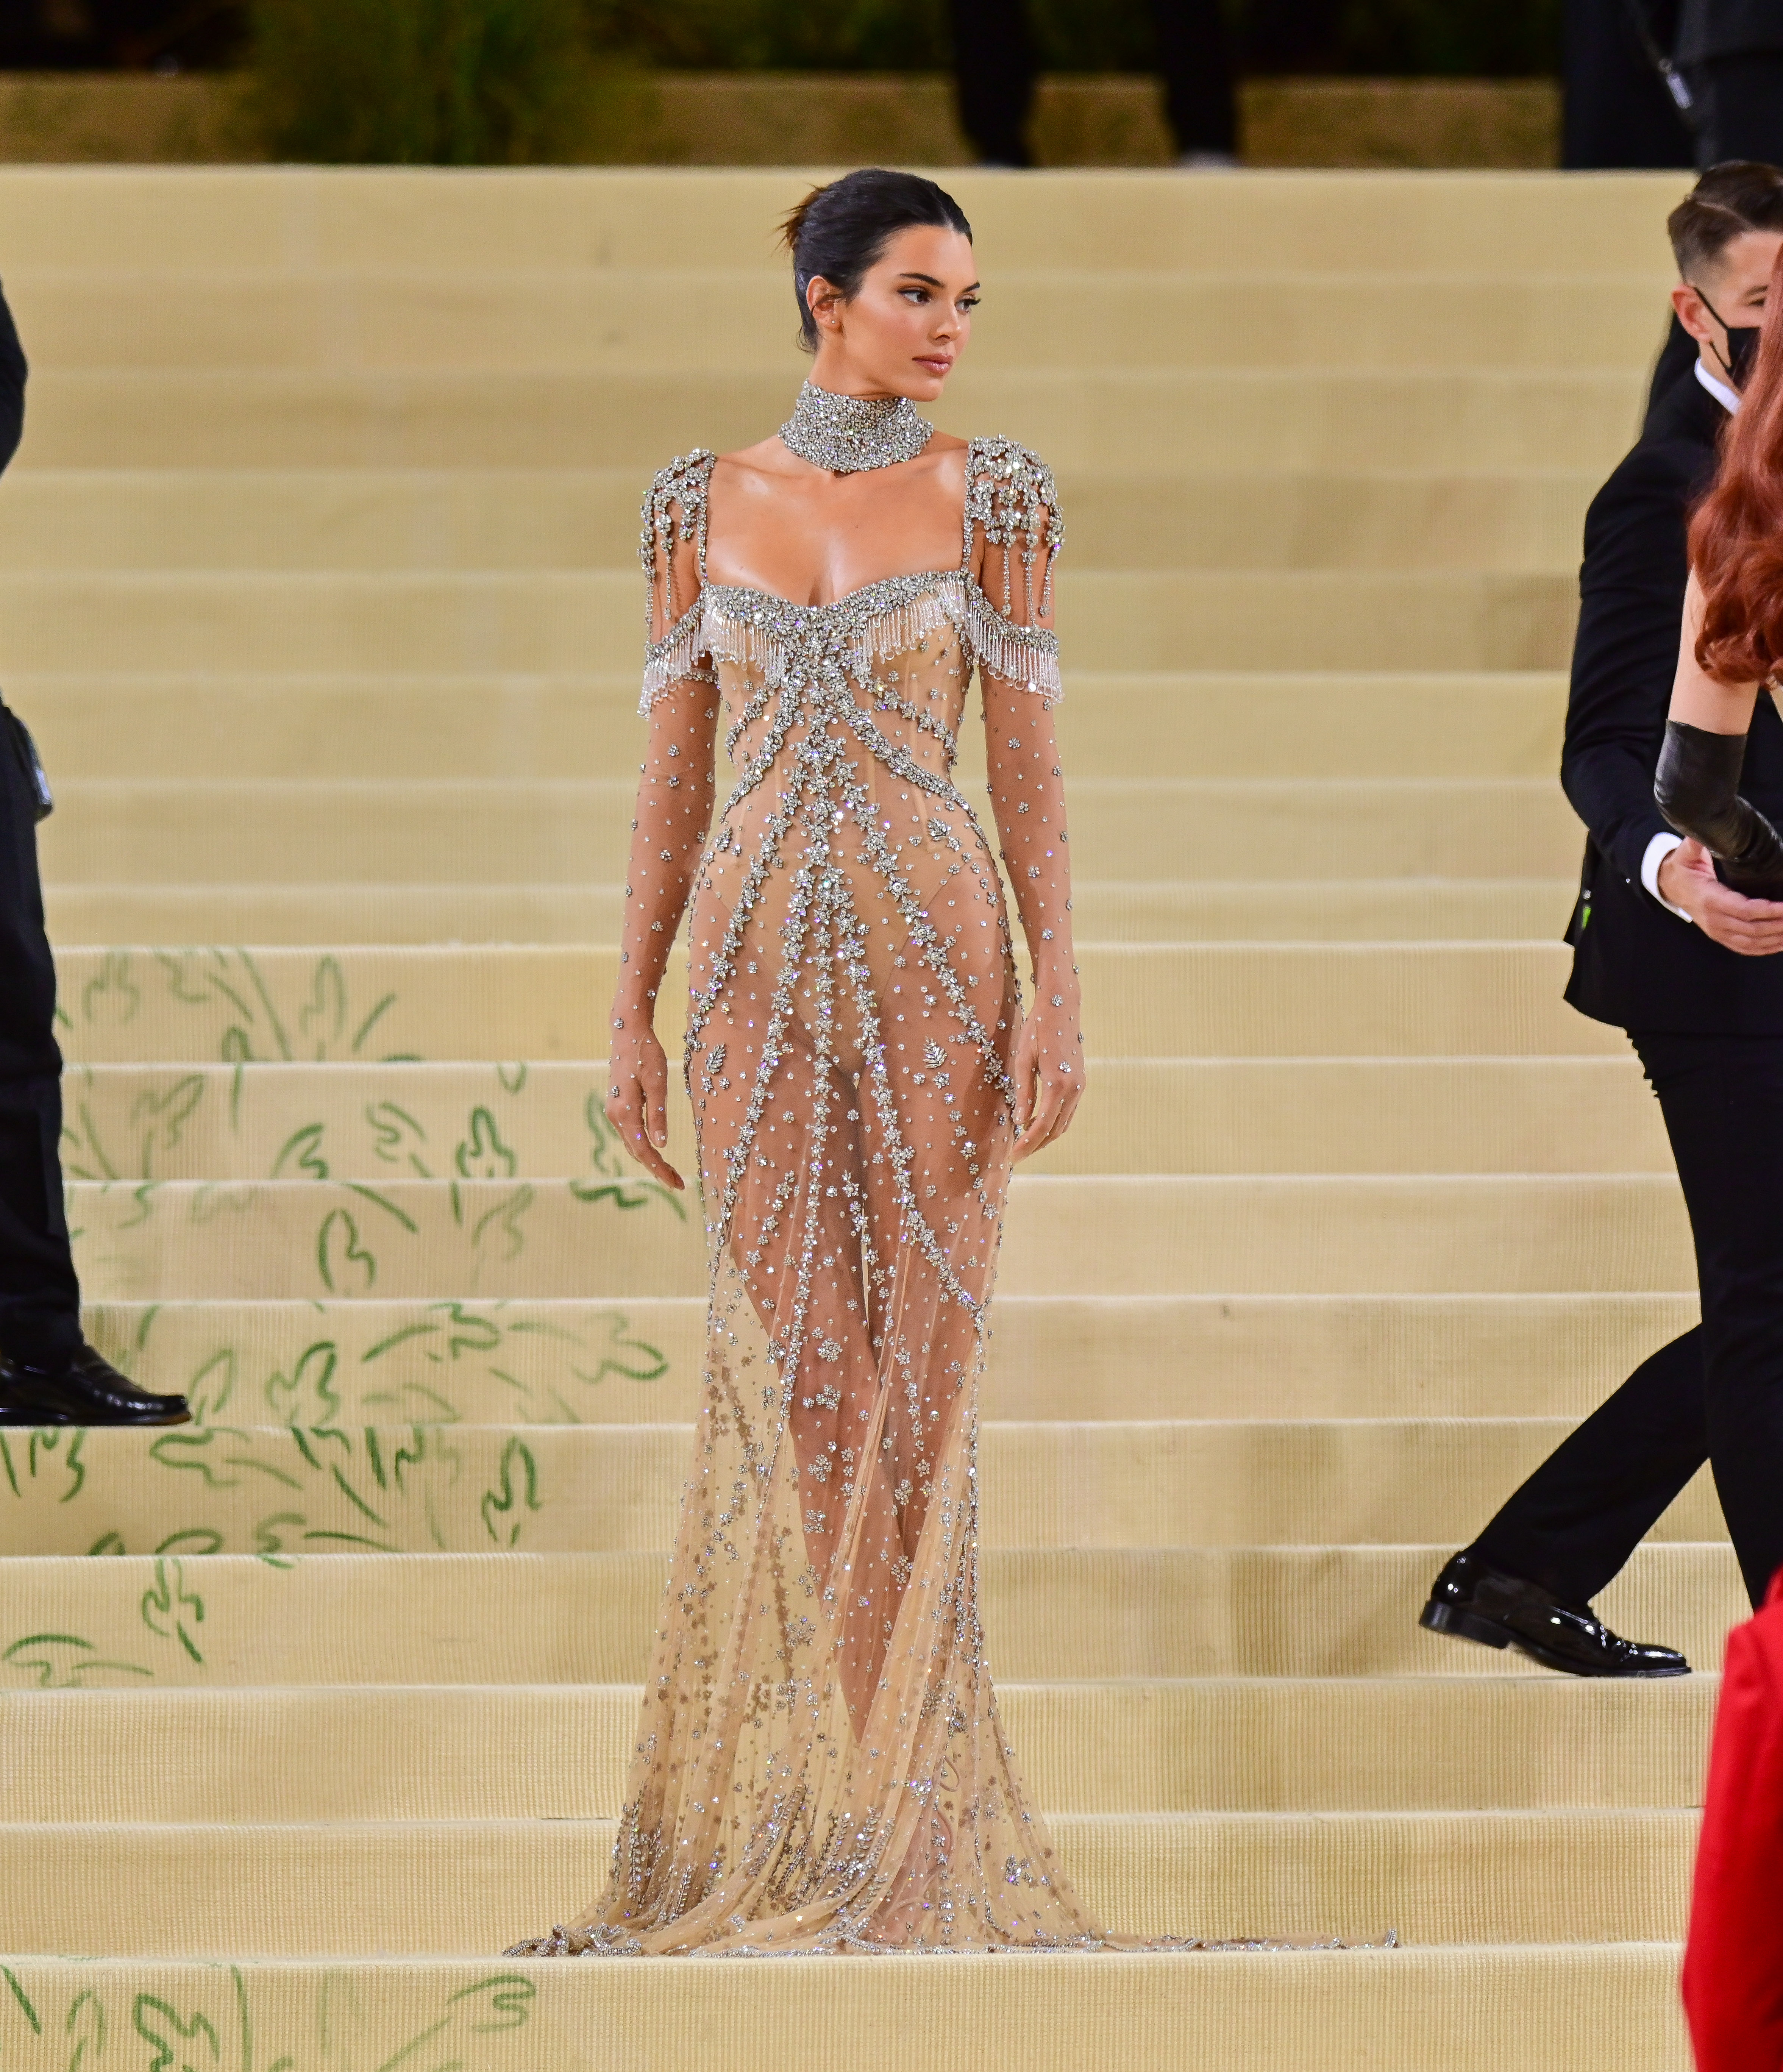 Kendall has walked the red carpet nine times